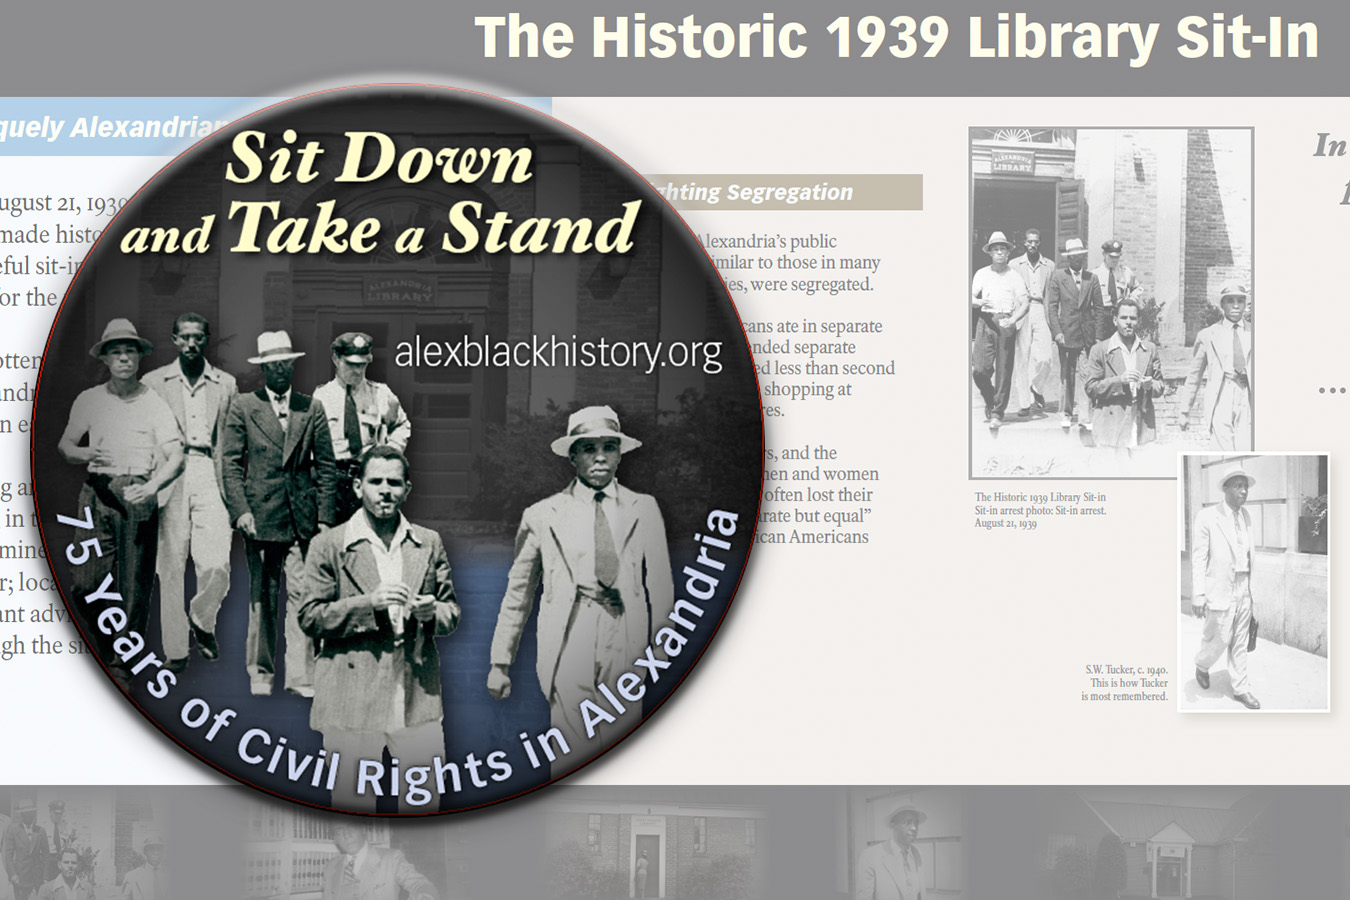 ABHM button : Button for Alexandria Black History Museum commemorating 75 years of Civil Rights